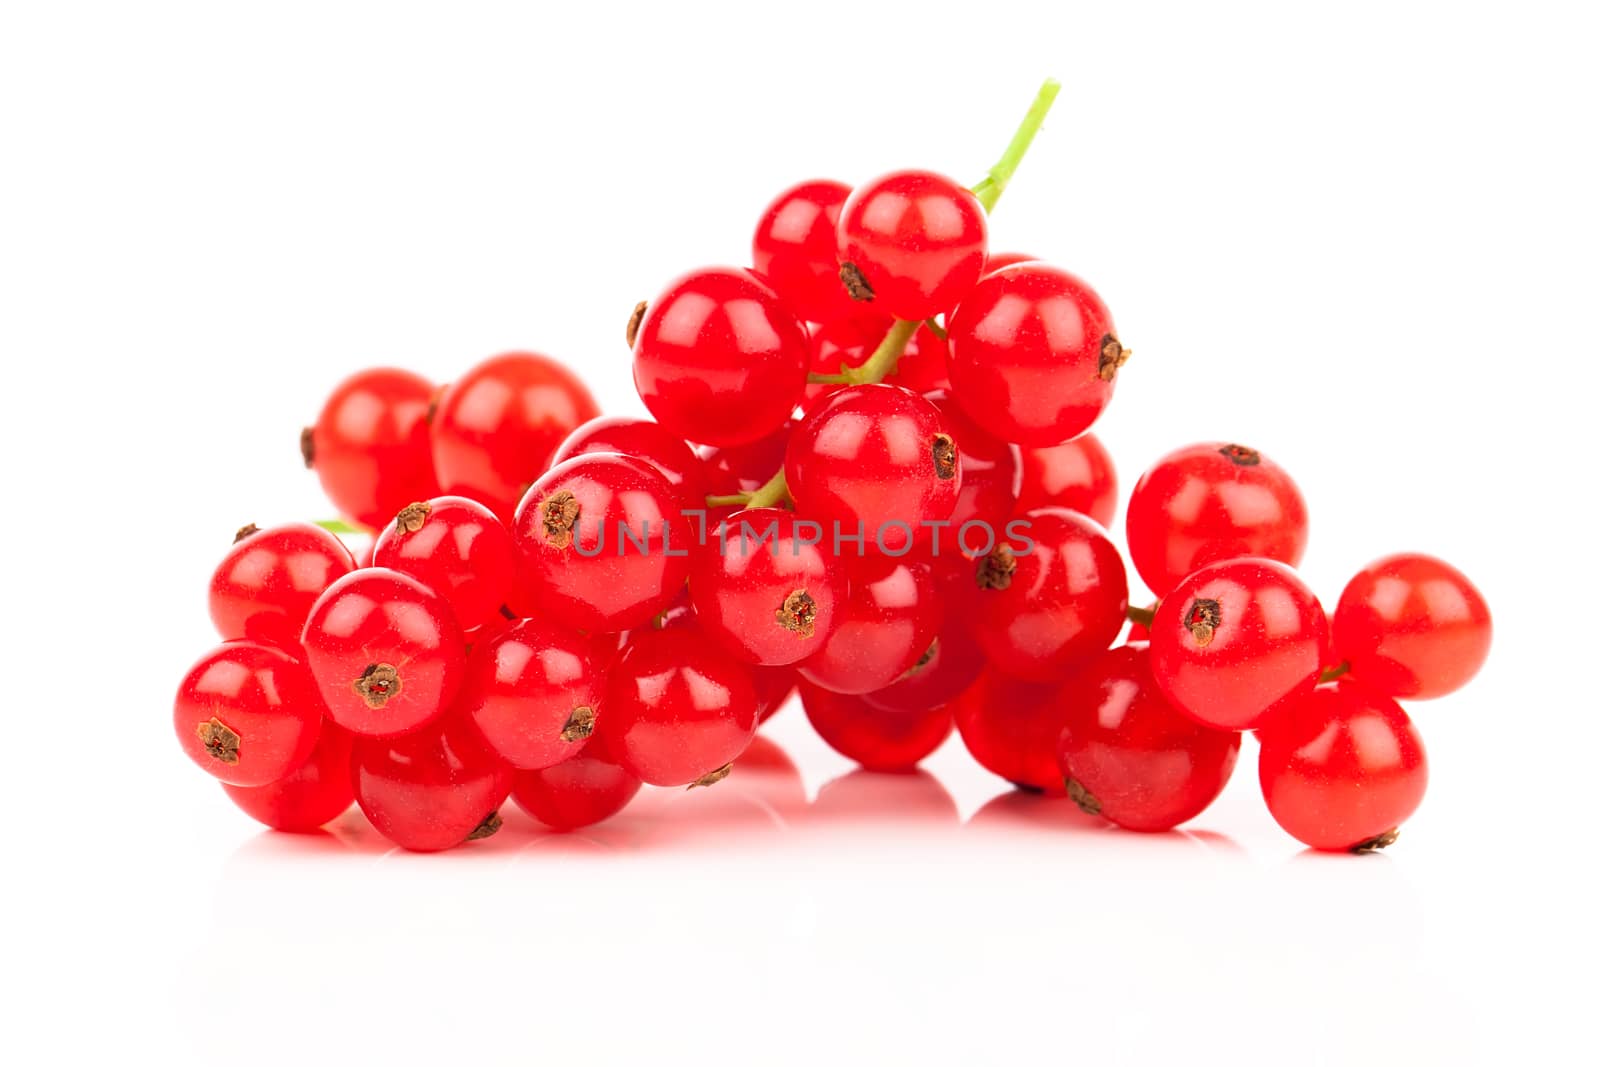 red currant on a white background